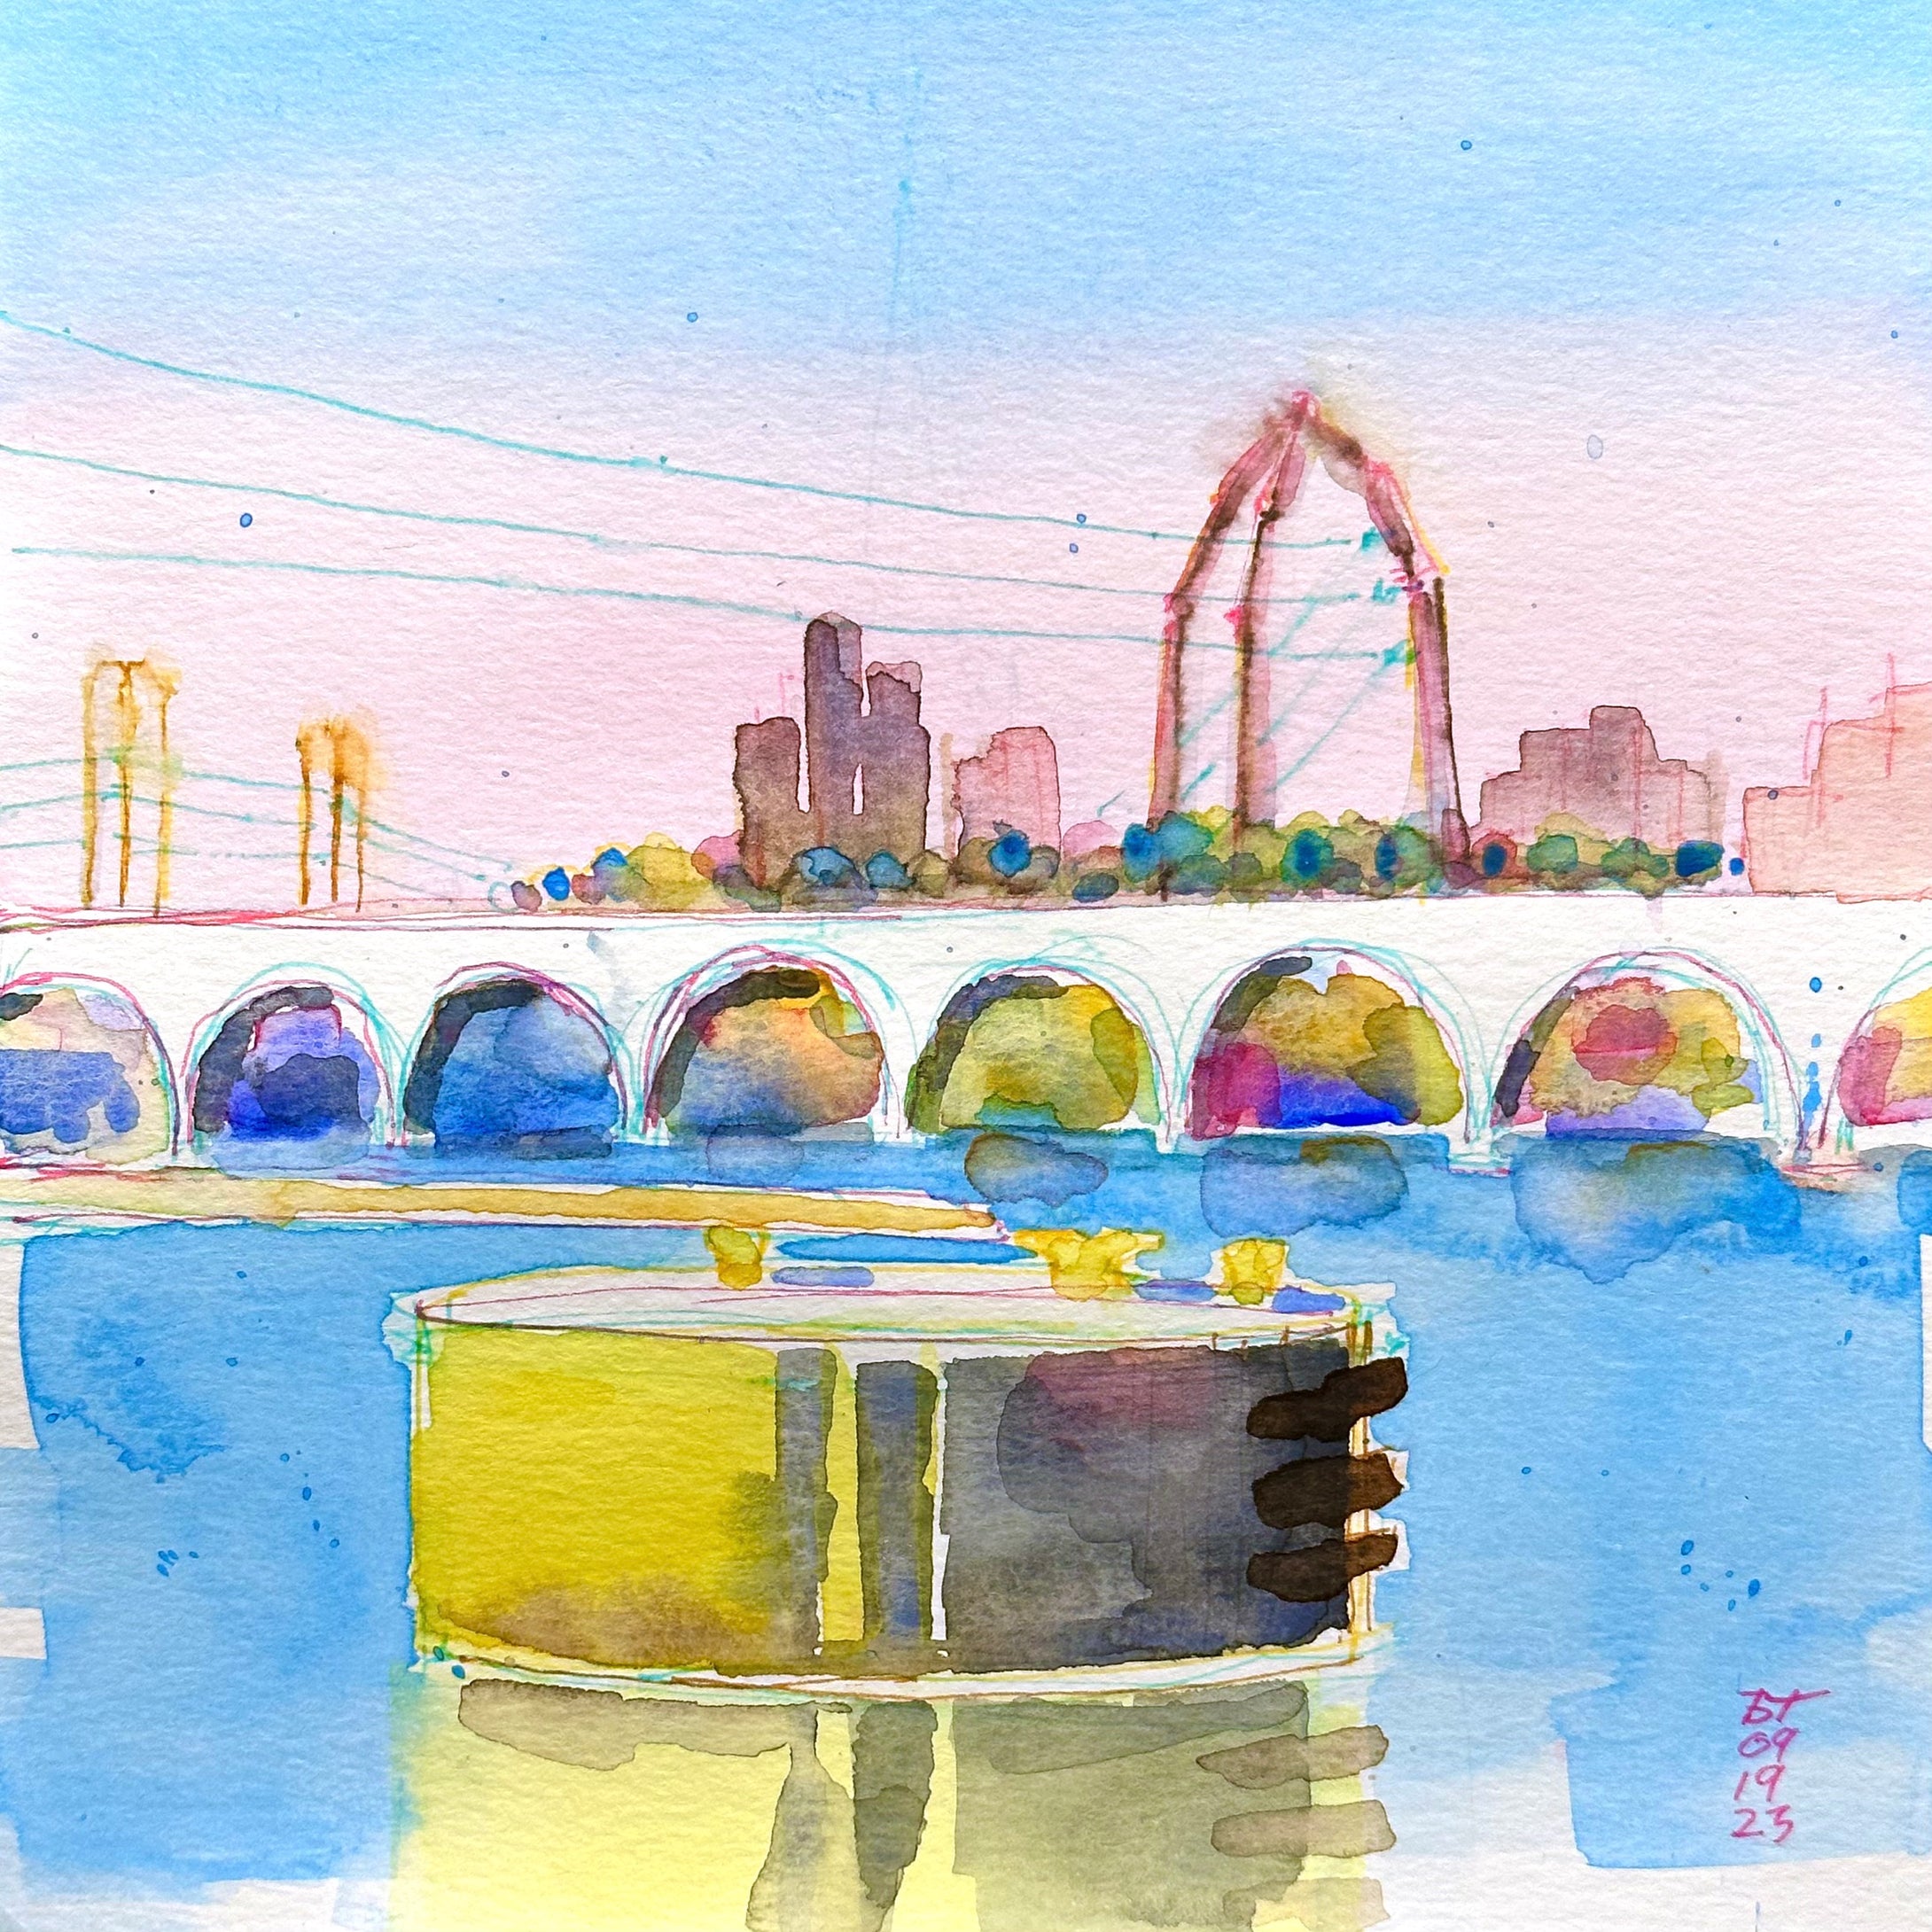 Stone arch bridge and barge pier, 09.19.23